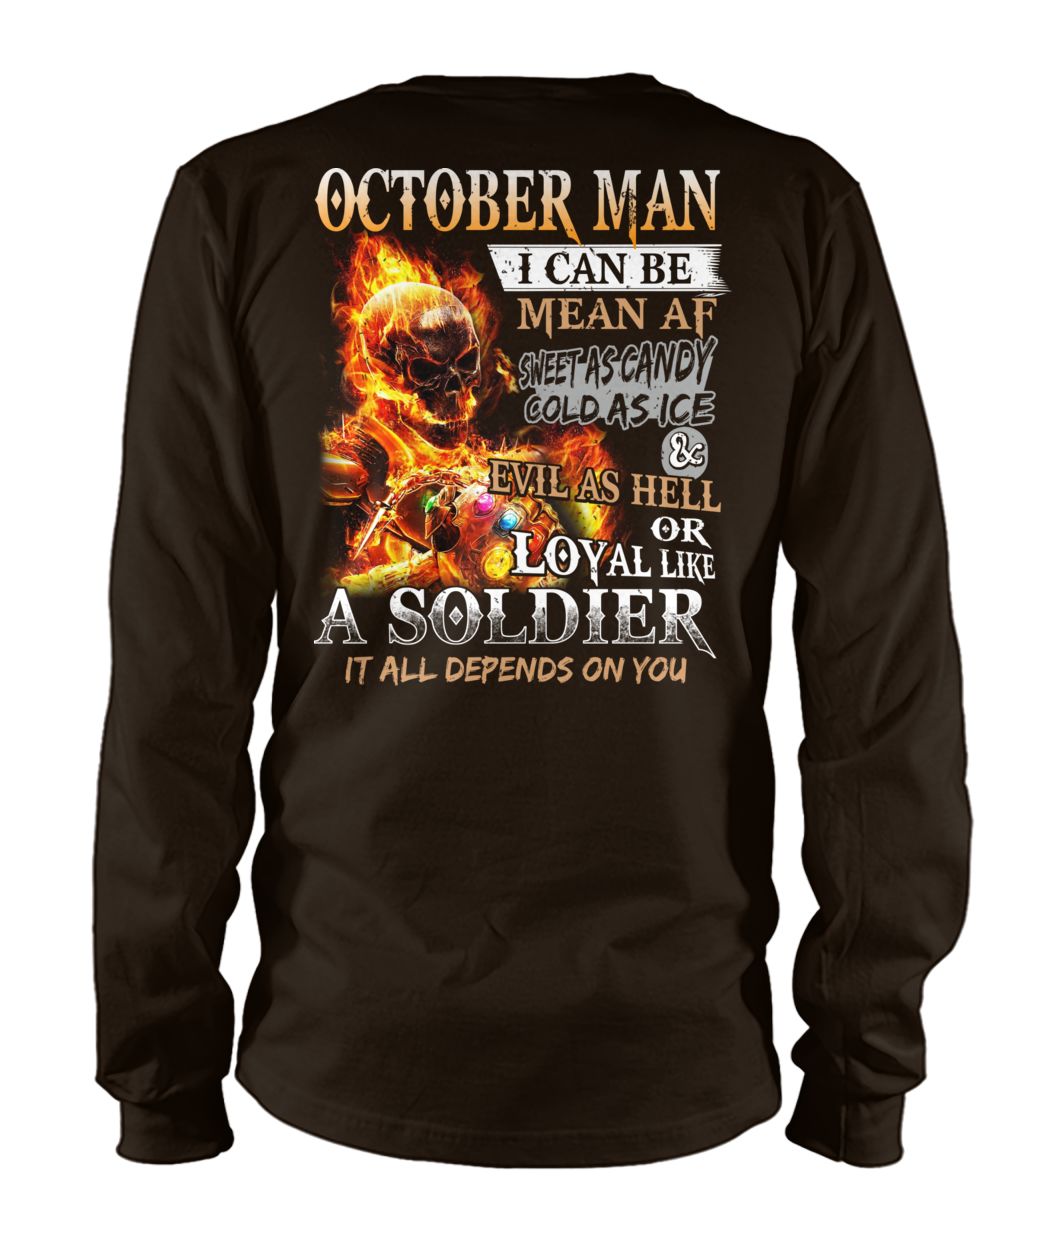 October man I can be mean af sweet as candy gold as ice and evil as hell unisex long sleeve